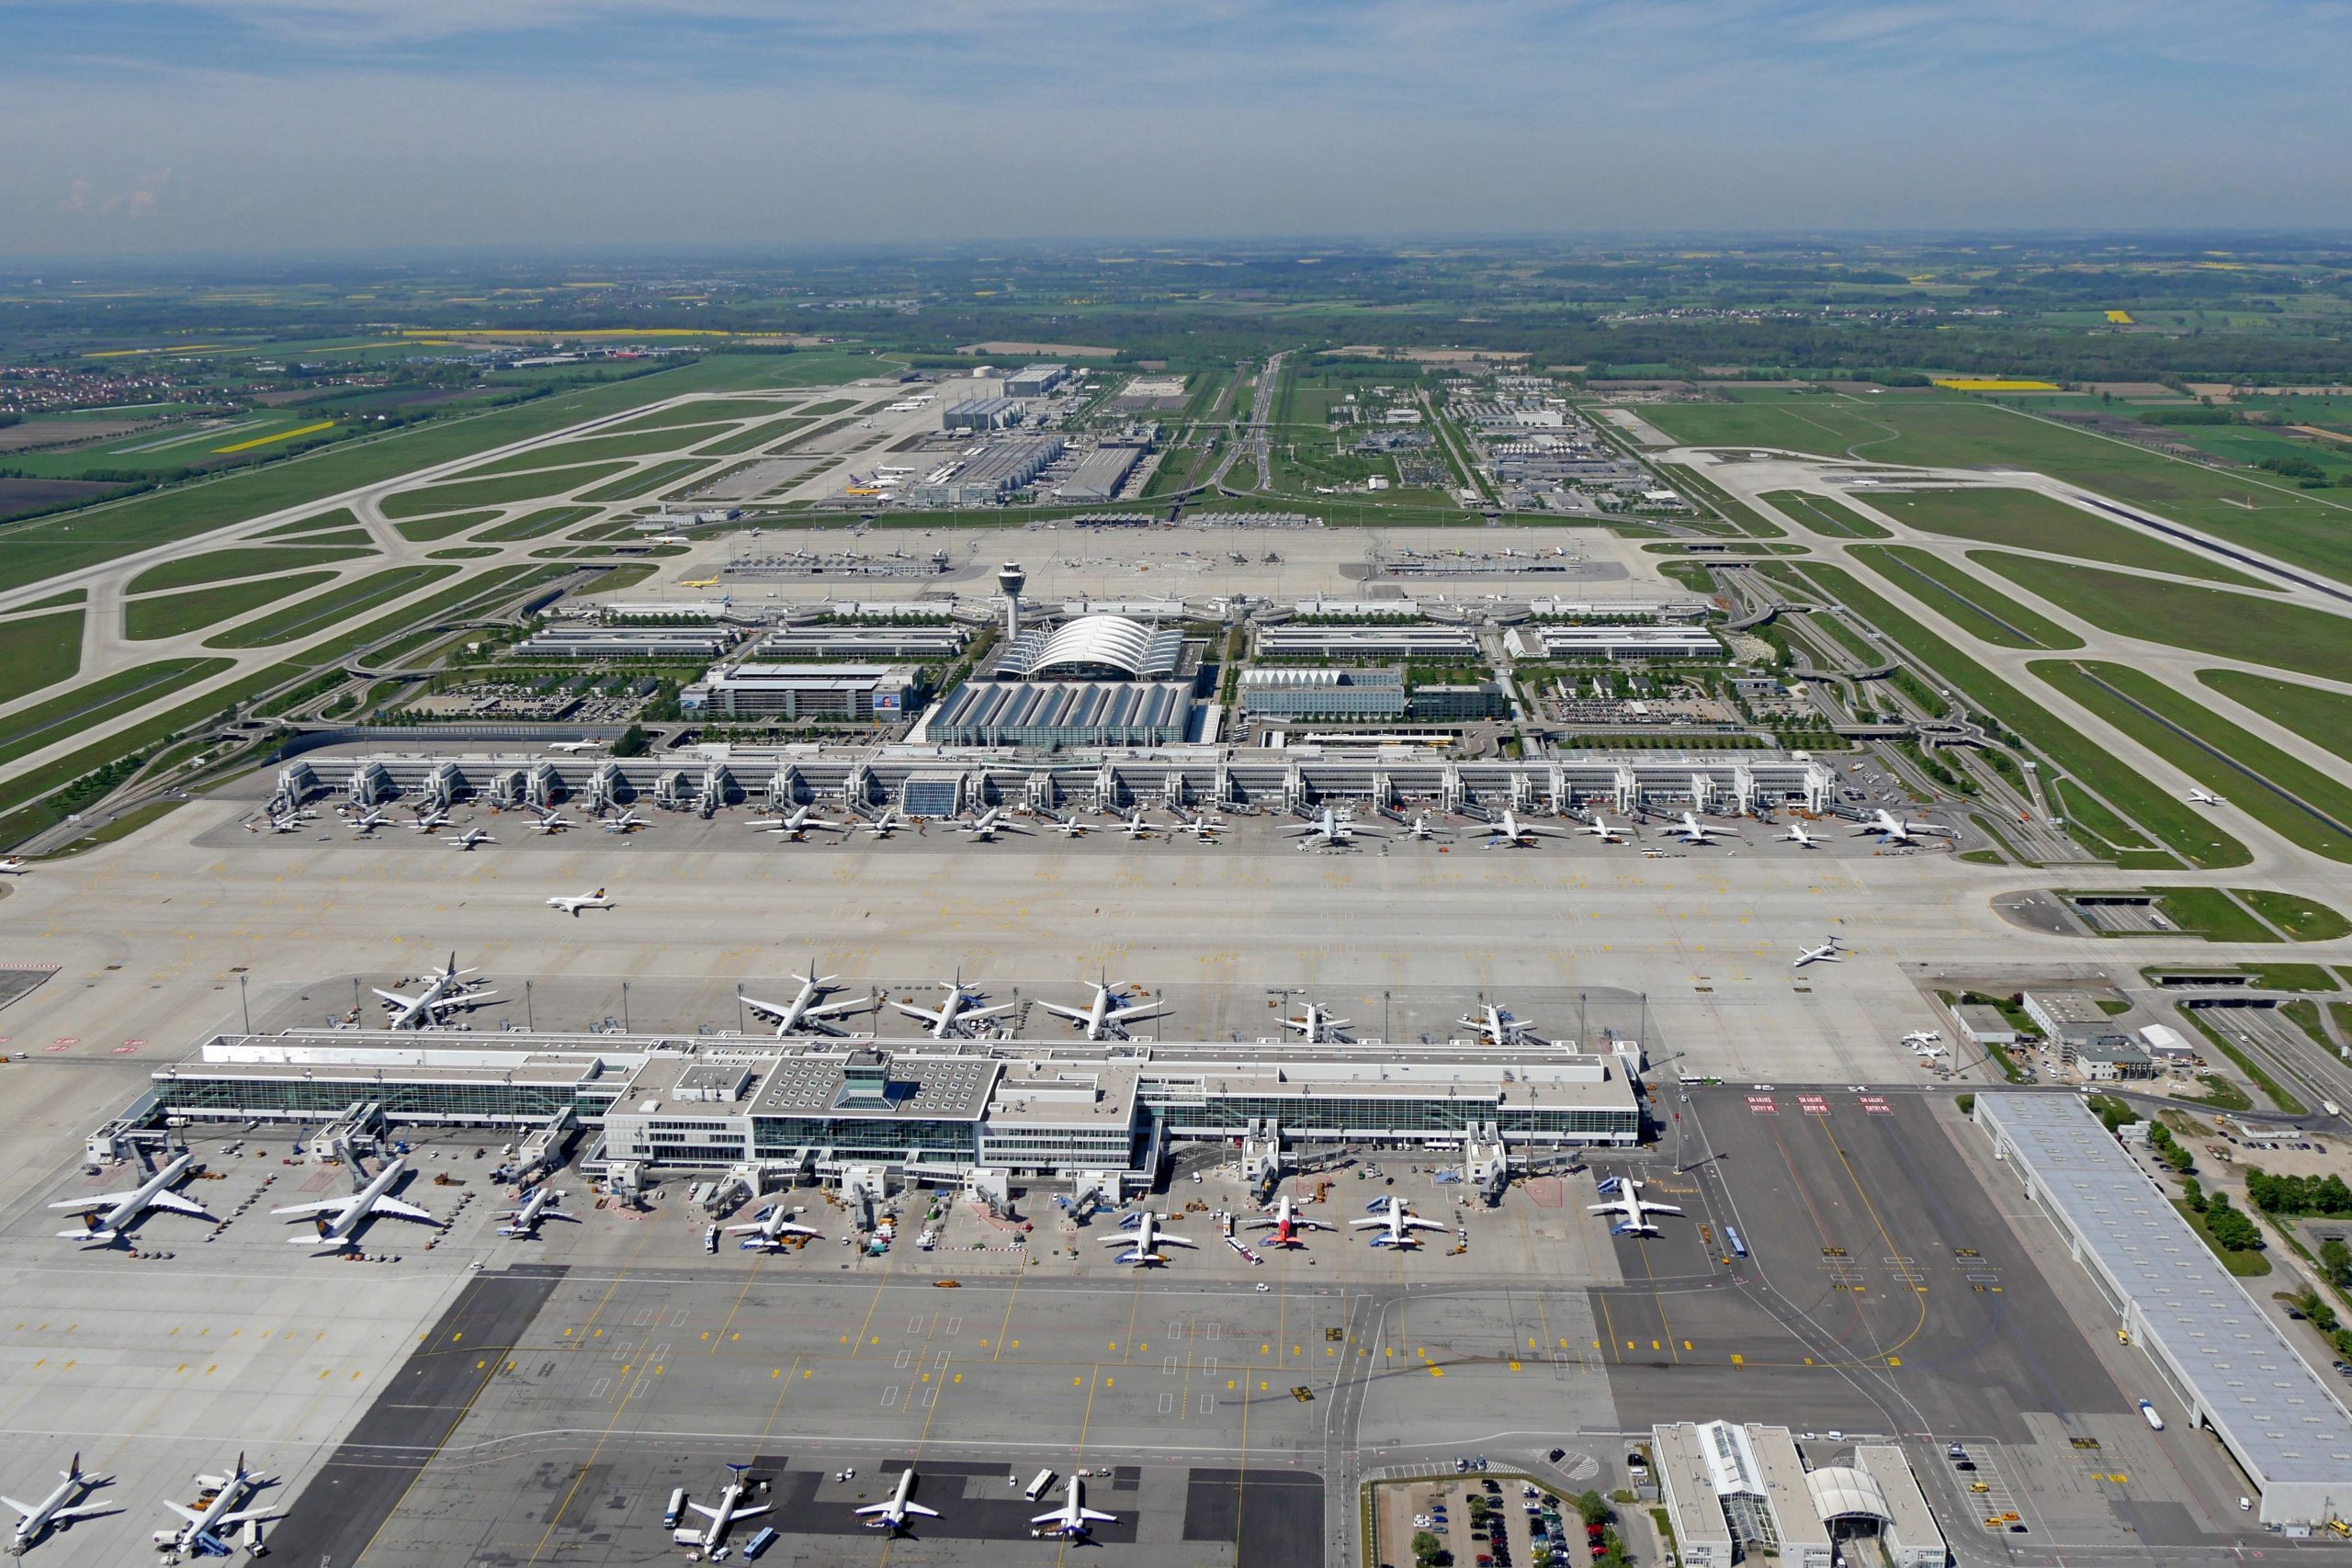 Aerial view of Munich Airport.